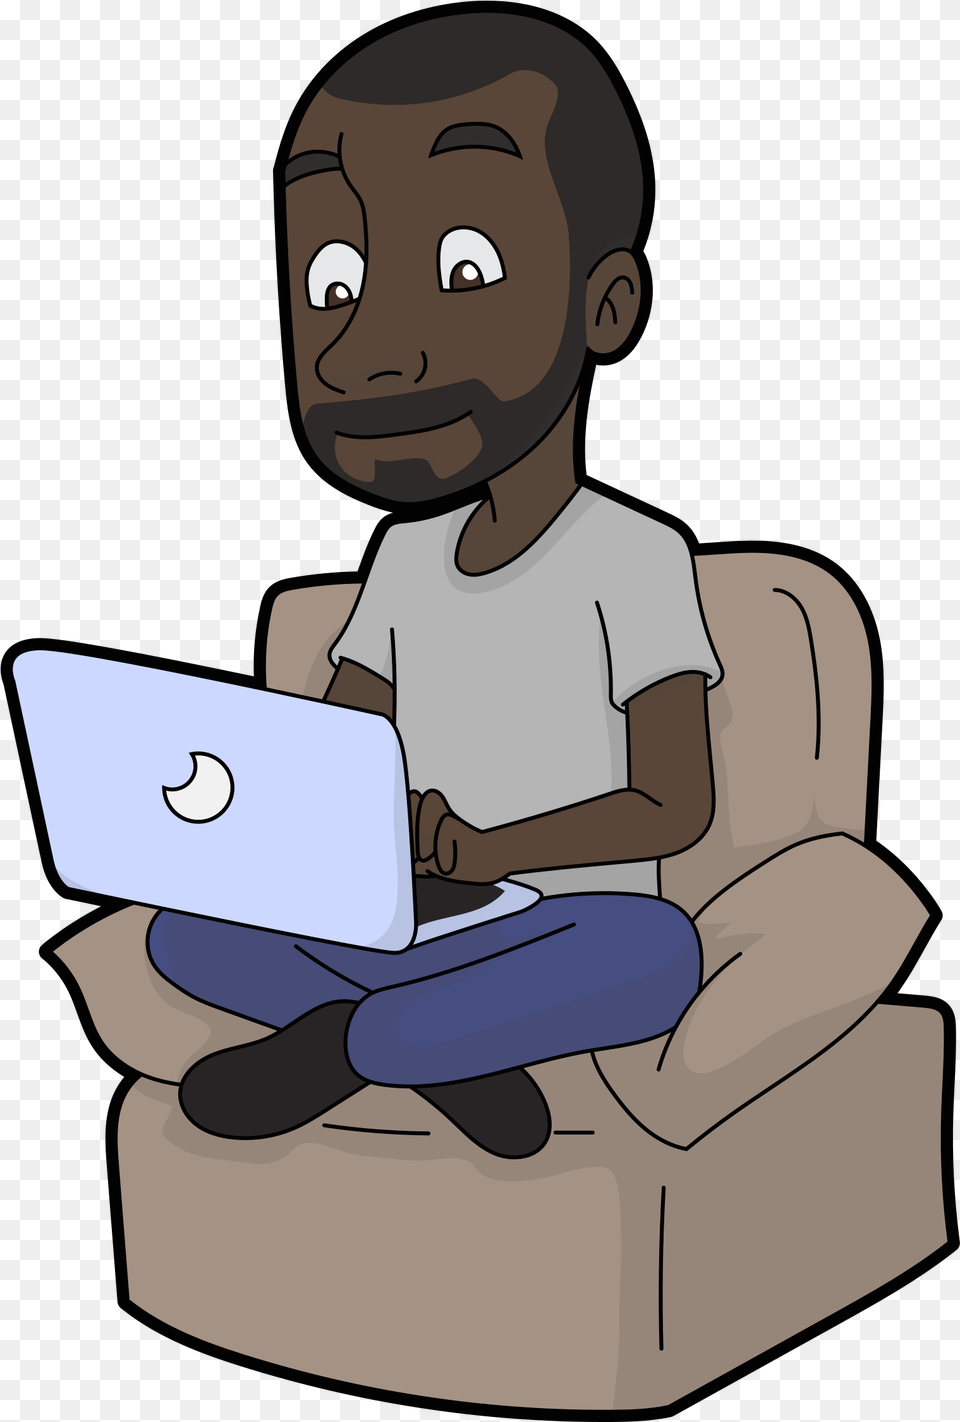 Open Wikimedia Commons, Sitting, Computer, Electronics, Person Png Image